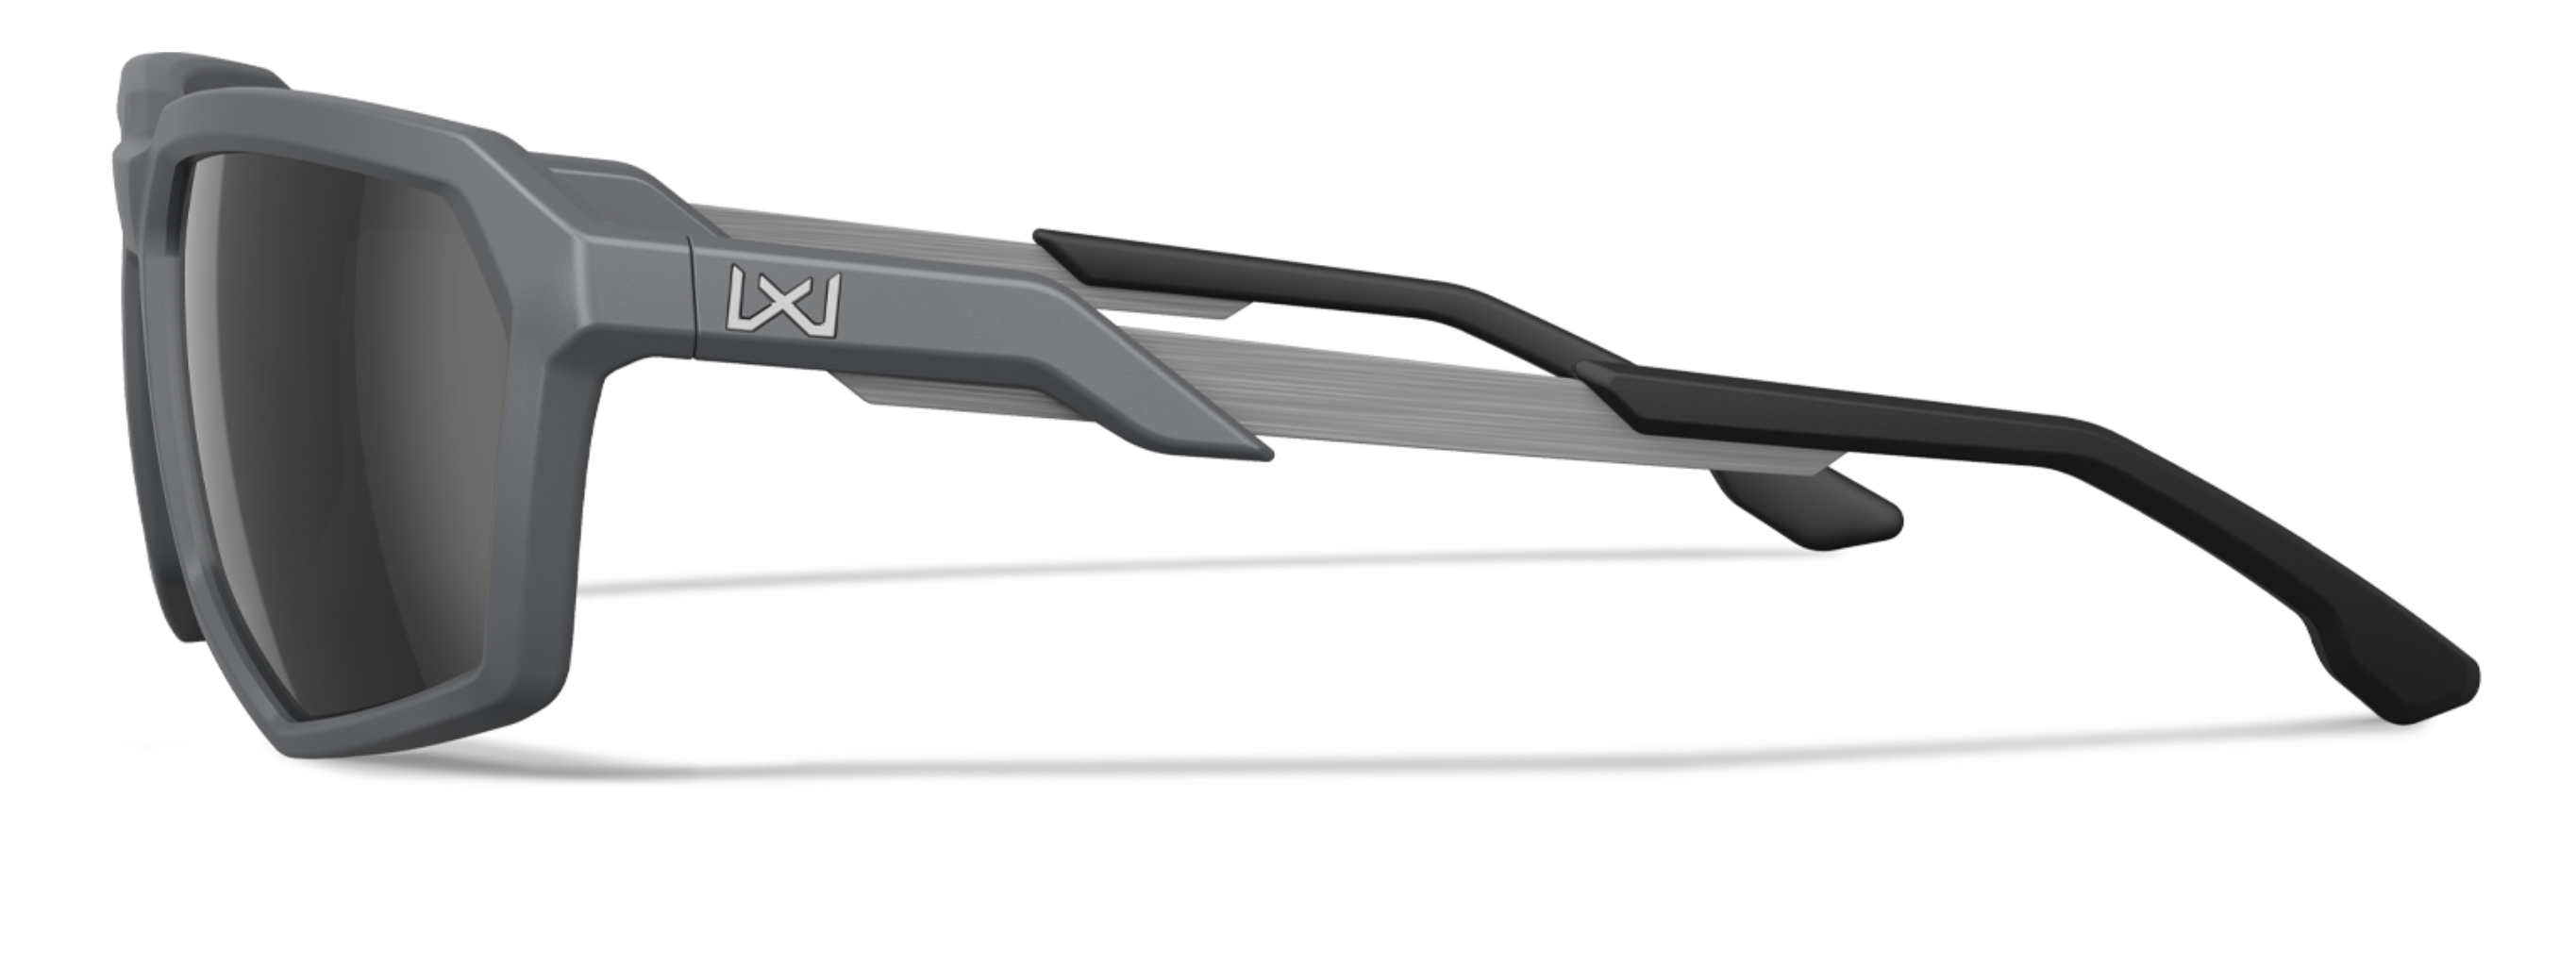 Wiley X Founder and Recon Sunglasses Make their Debut